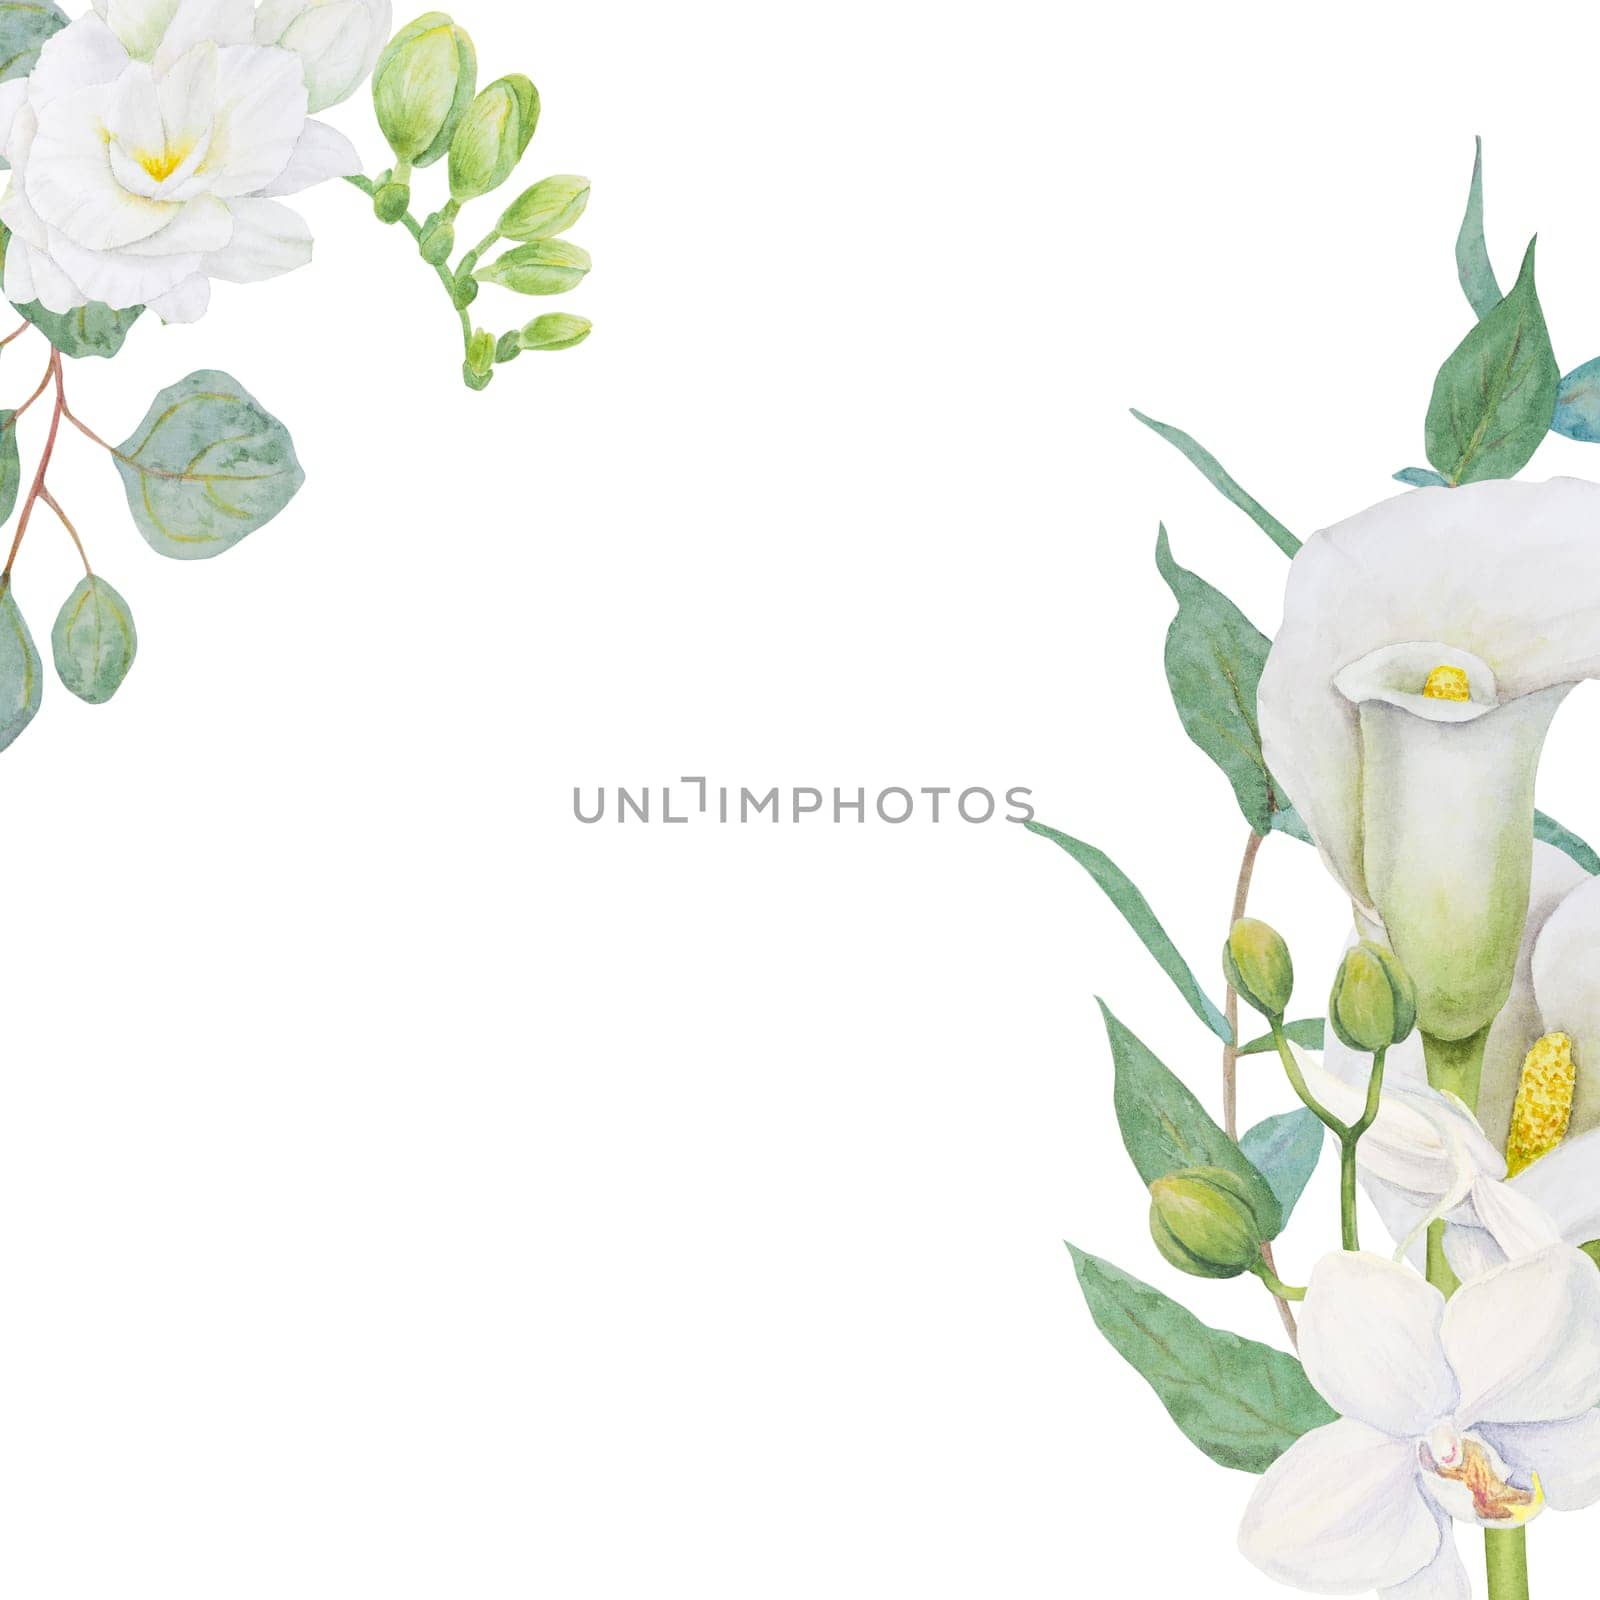 Watercolor clipart of white calla lily, freesia flowers and eucalipt. Hand drawn floral illustration for wedding invitations, floristic salons, cosmetics, beauty. Isolated tropical water arum for greetings, prints, posters